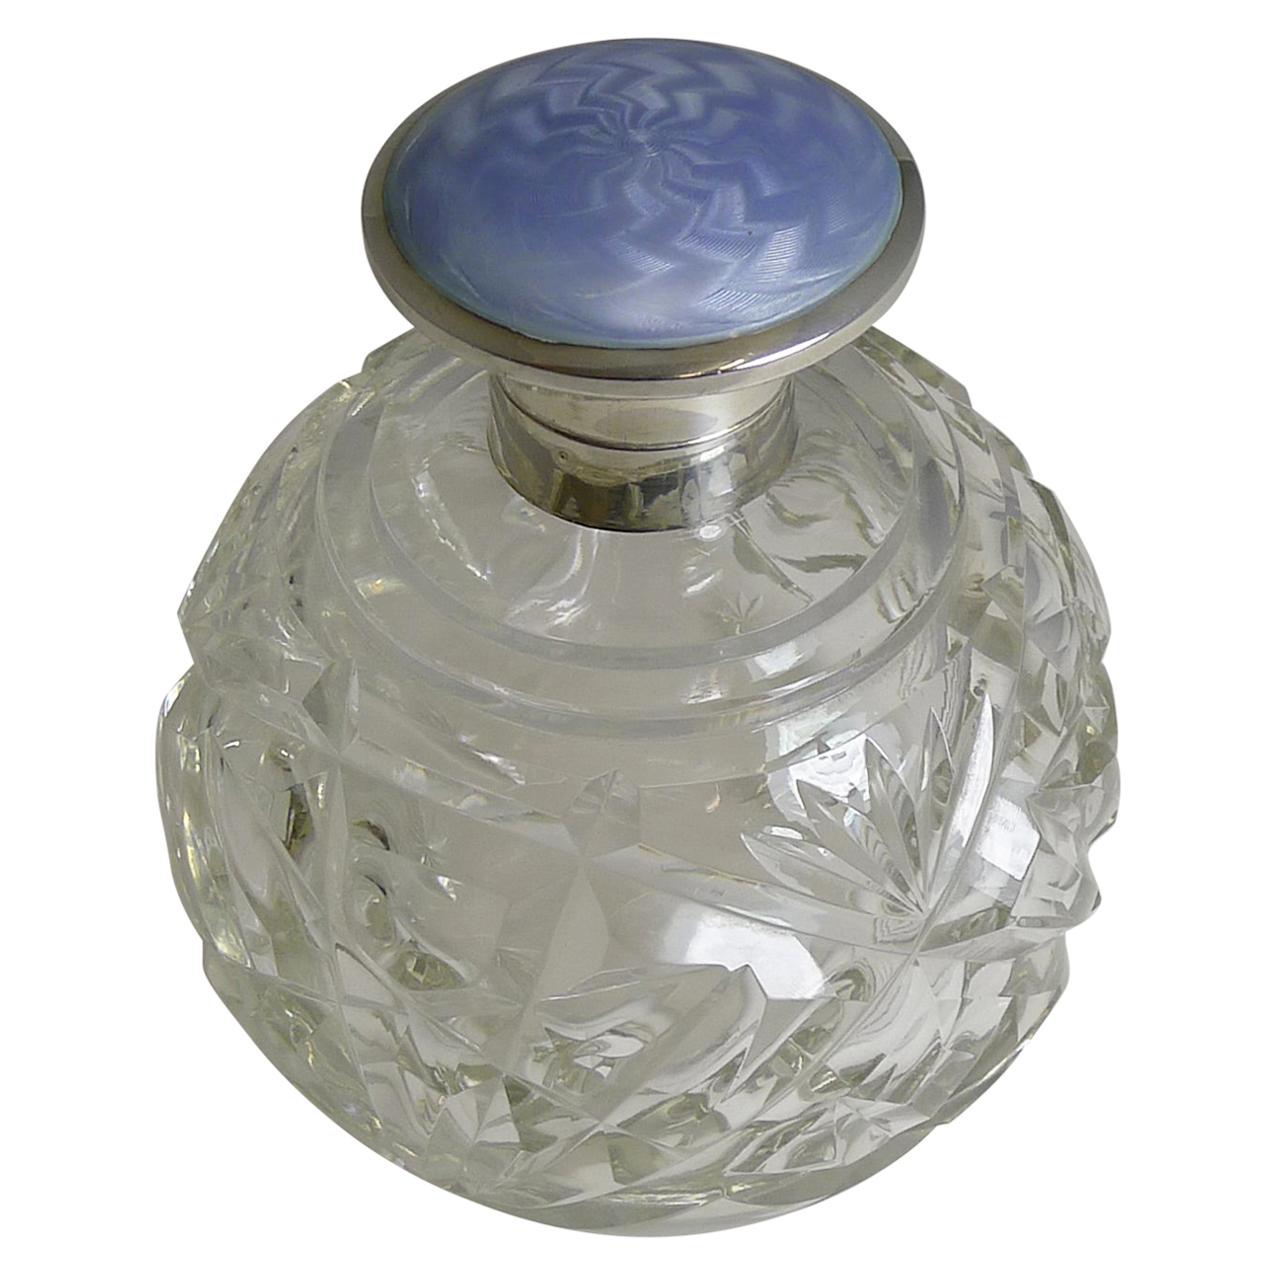 Large Globe Perfume Bottle, English Sterling Silver and Guilloche Enamel Lid